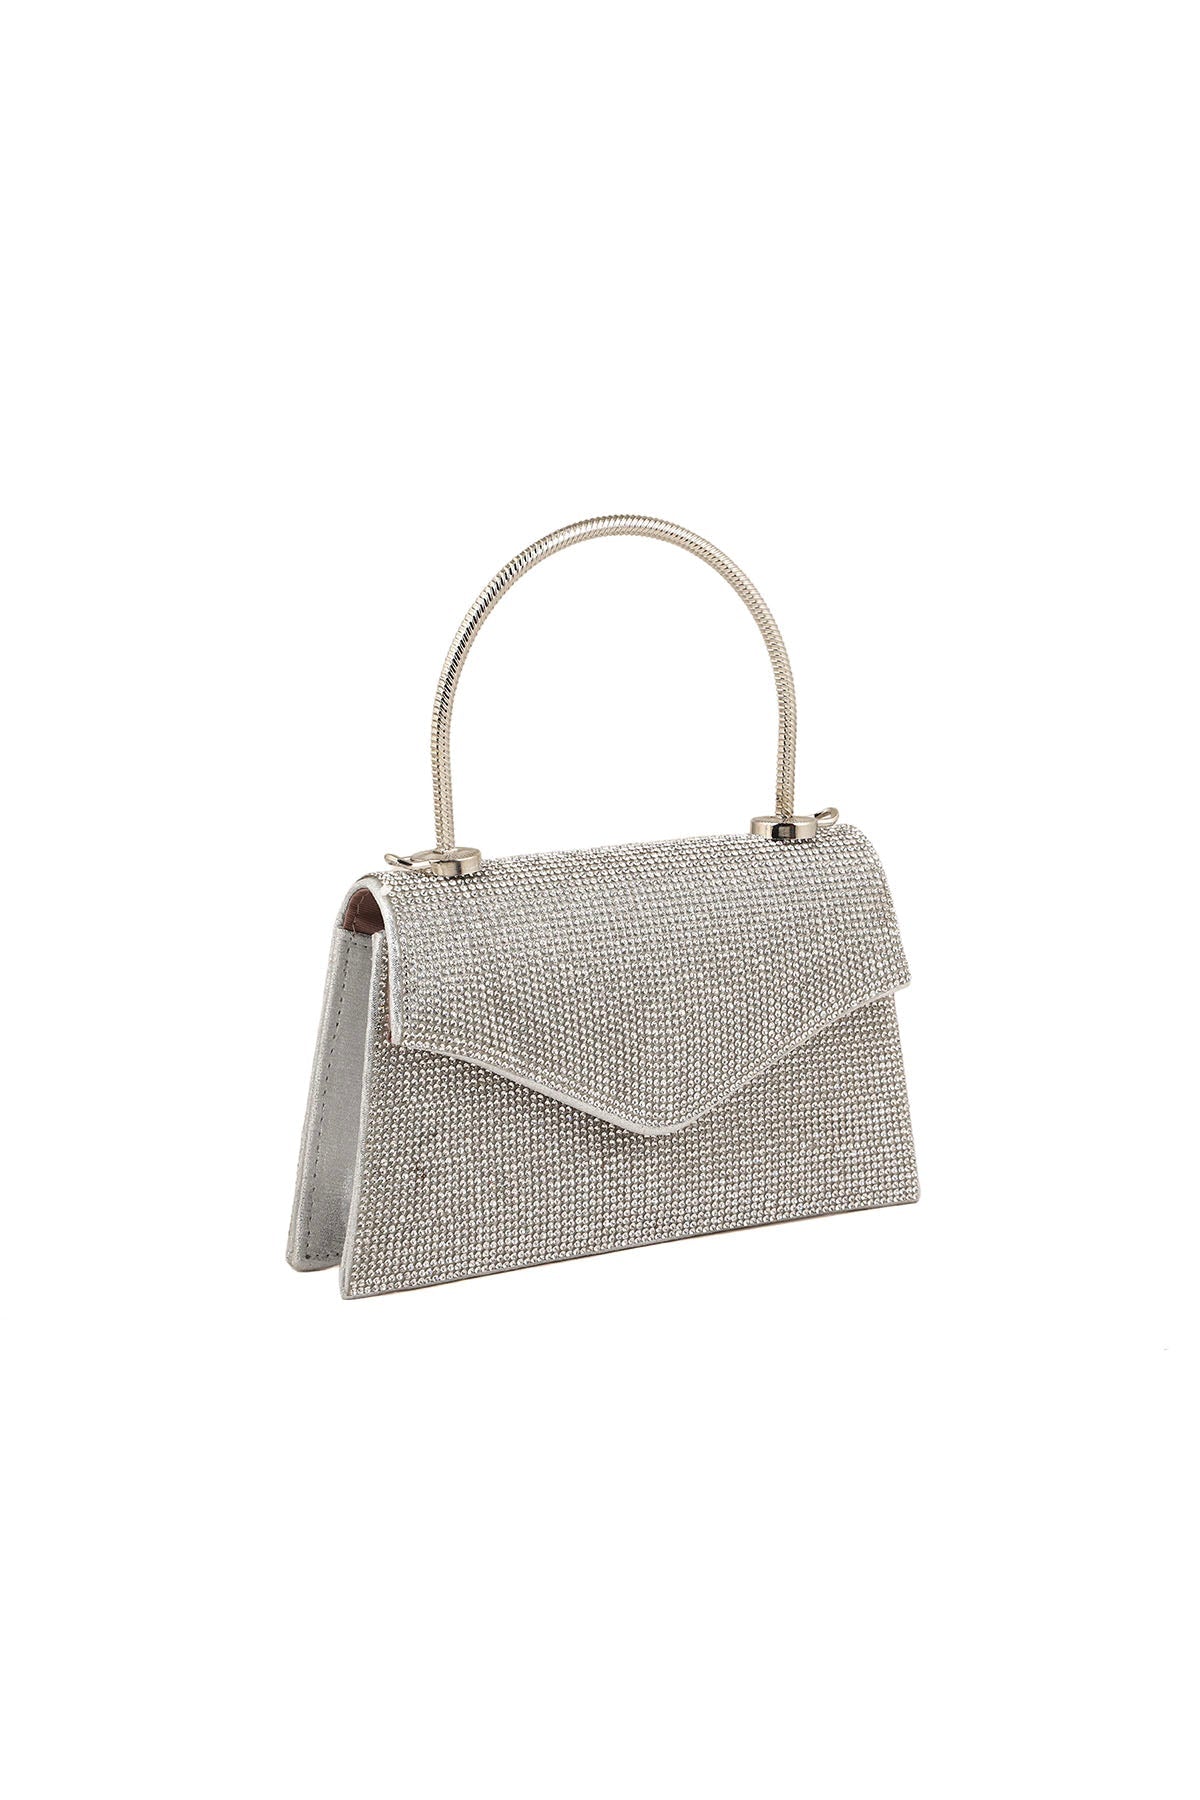 Top Handle Hand Bags B21603-Silver